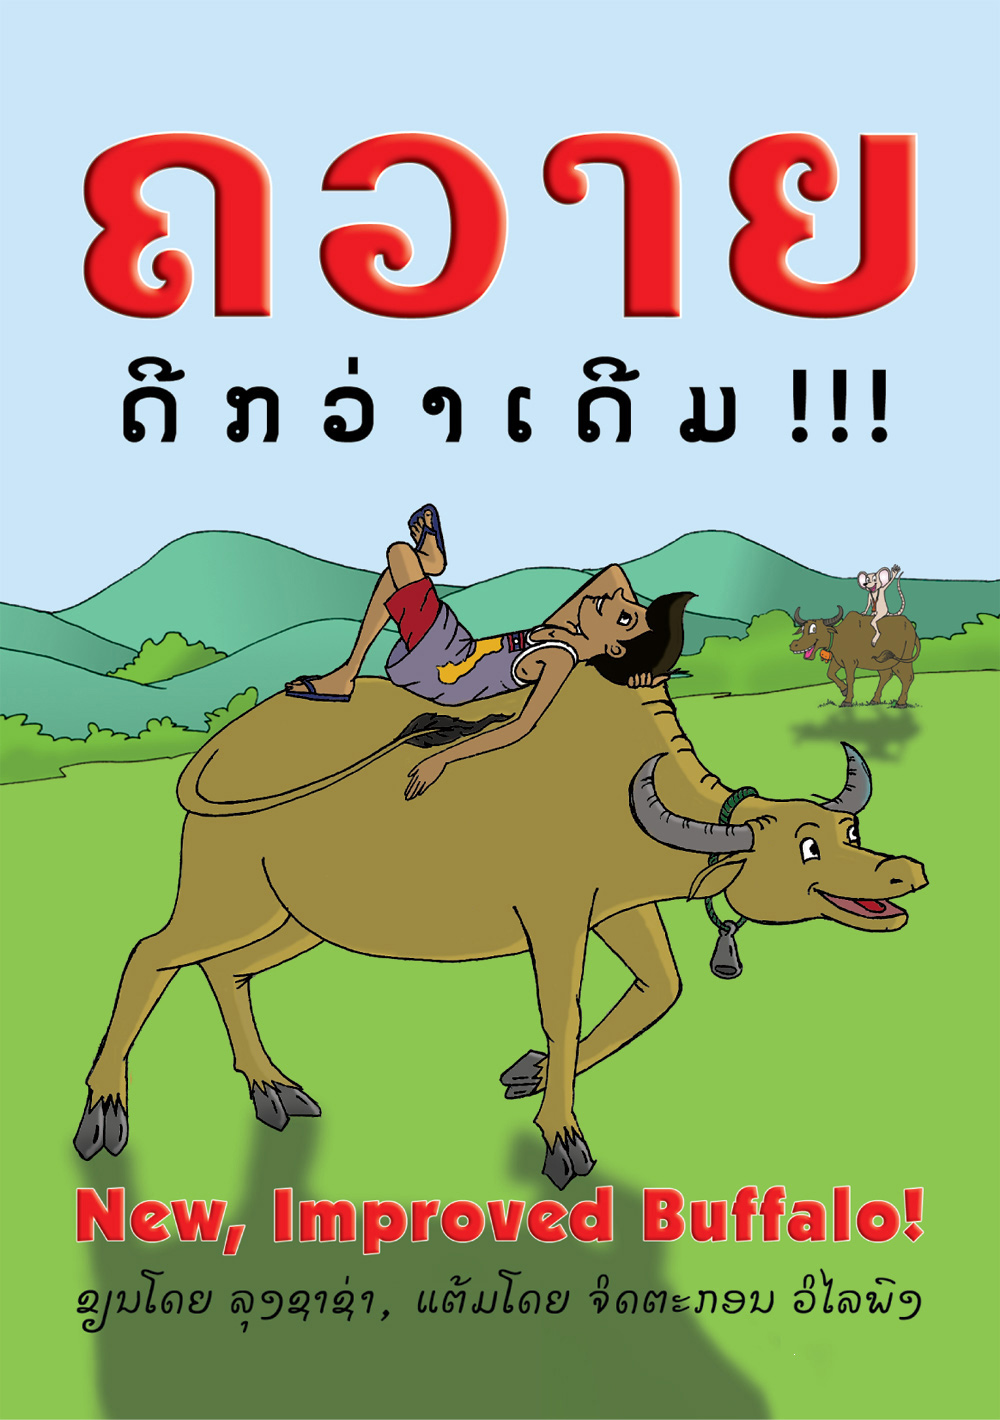 New, Improved Buffalo large book cover, published in Lao language